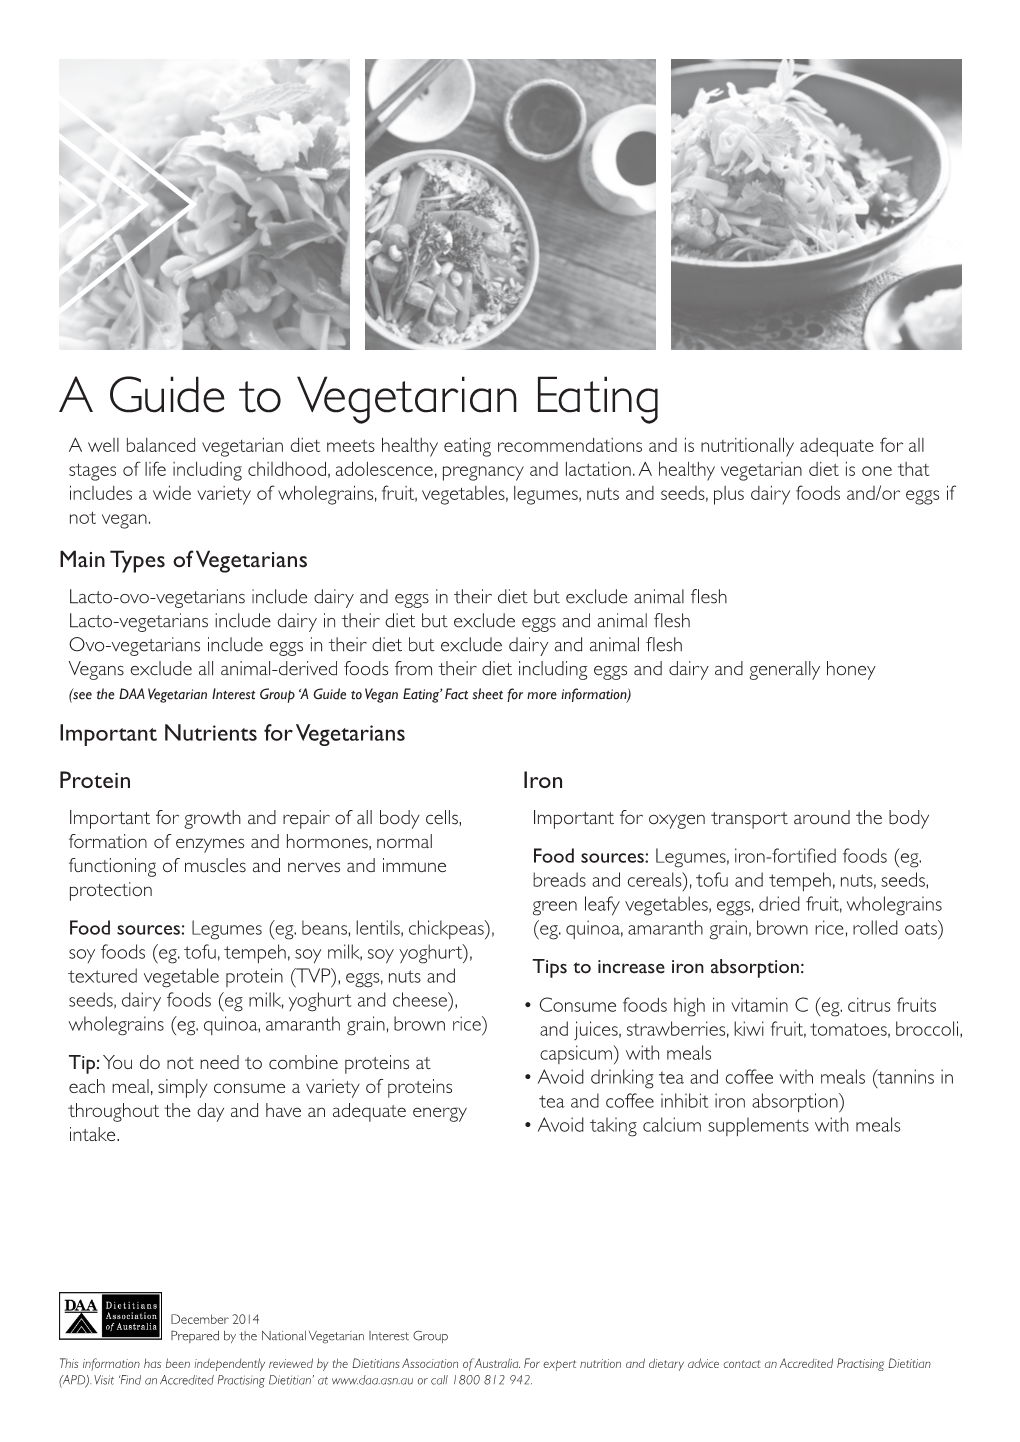 A Guide to Vegetarian Eating